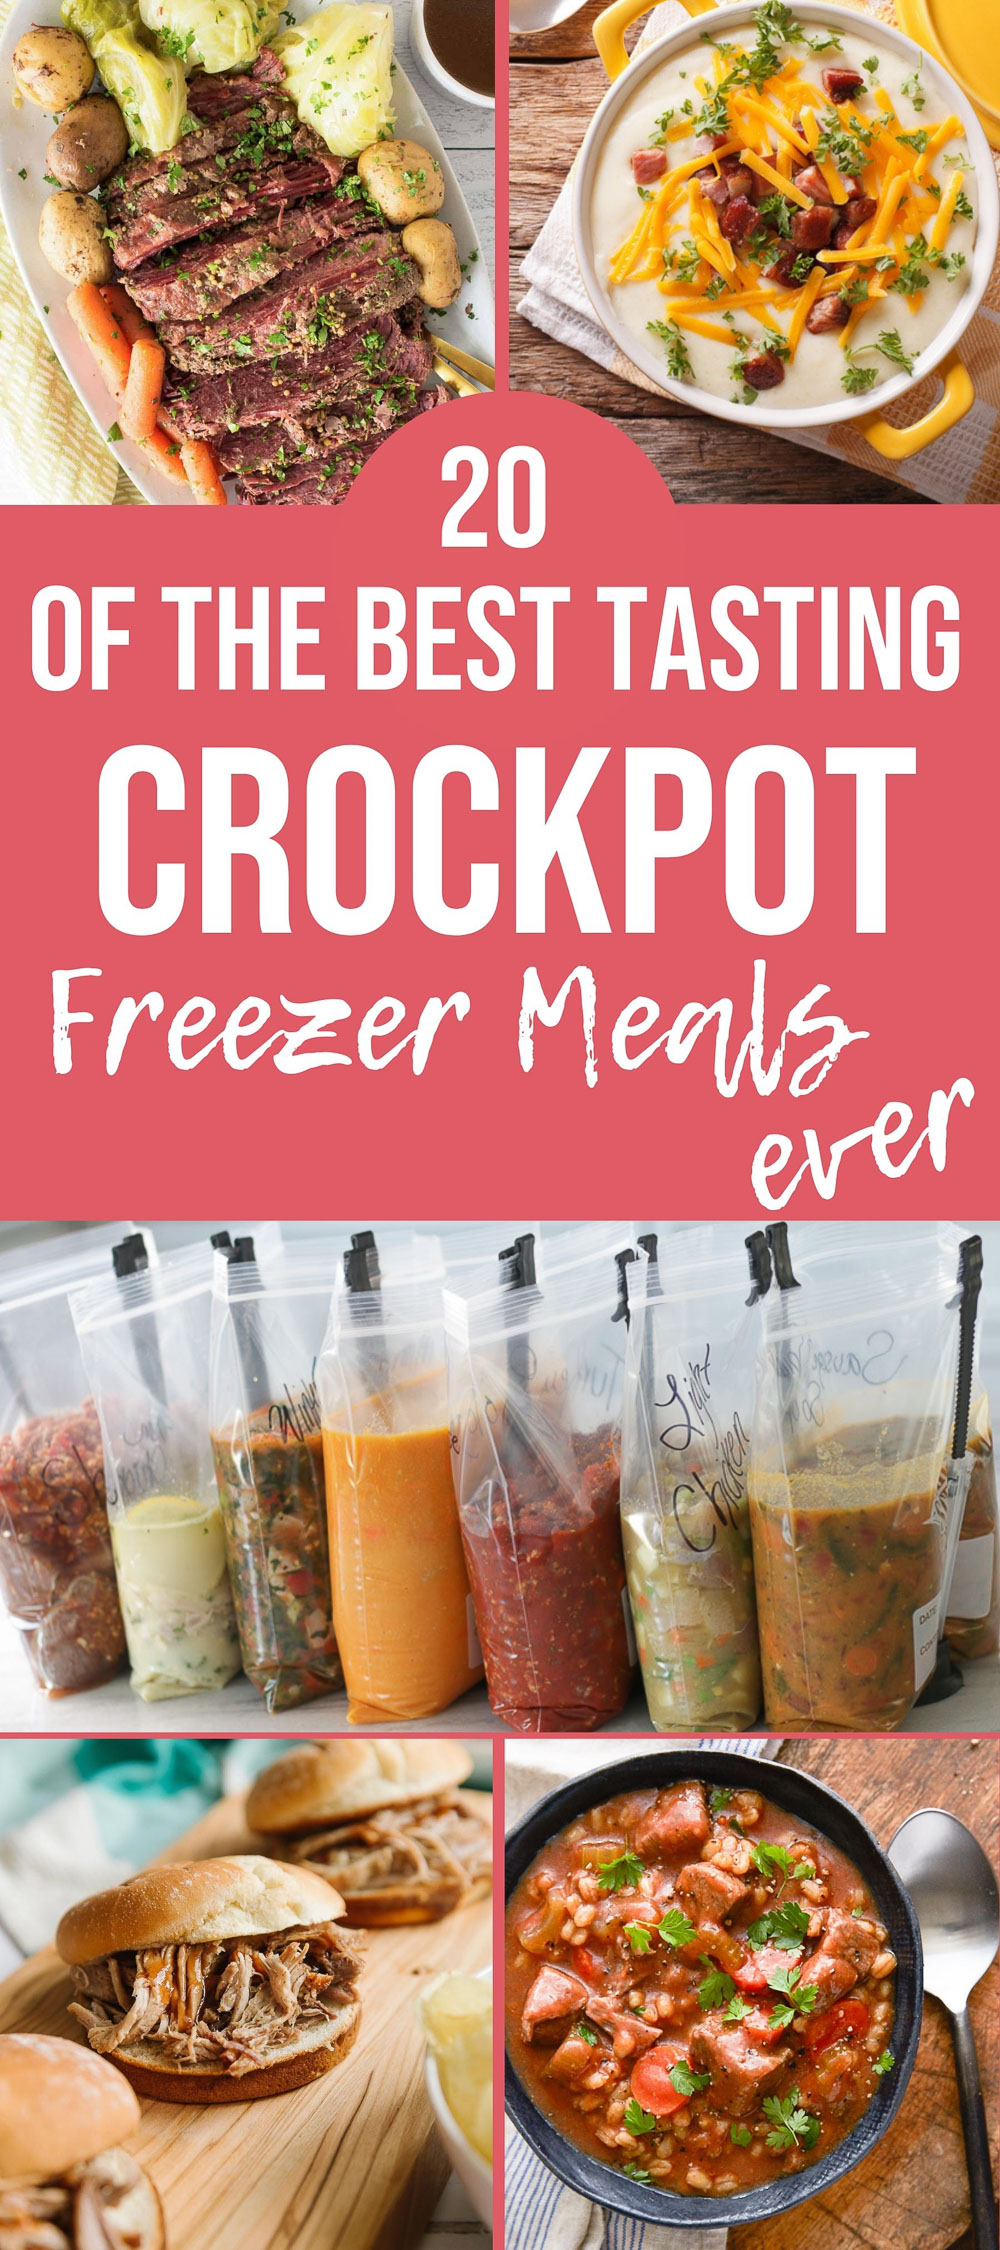 20 of the best crockpot freezer meals ever including loaded potato soup in a bowl, an oval plate with corned beef sliced neatly on it, a black slow cooker with chili inside, 4 chicken tacos in a row and three chicken sandwiches on a square plate.